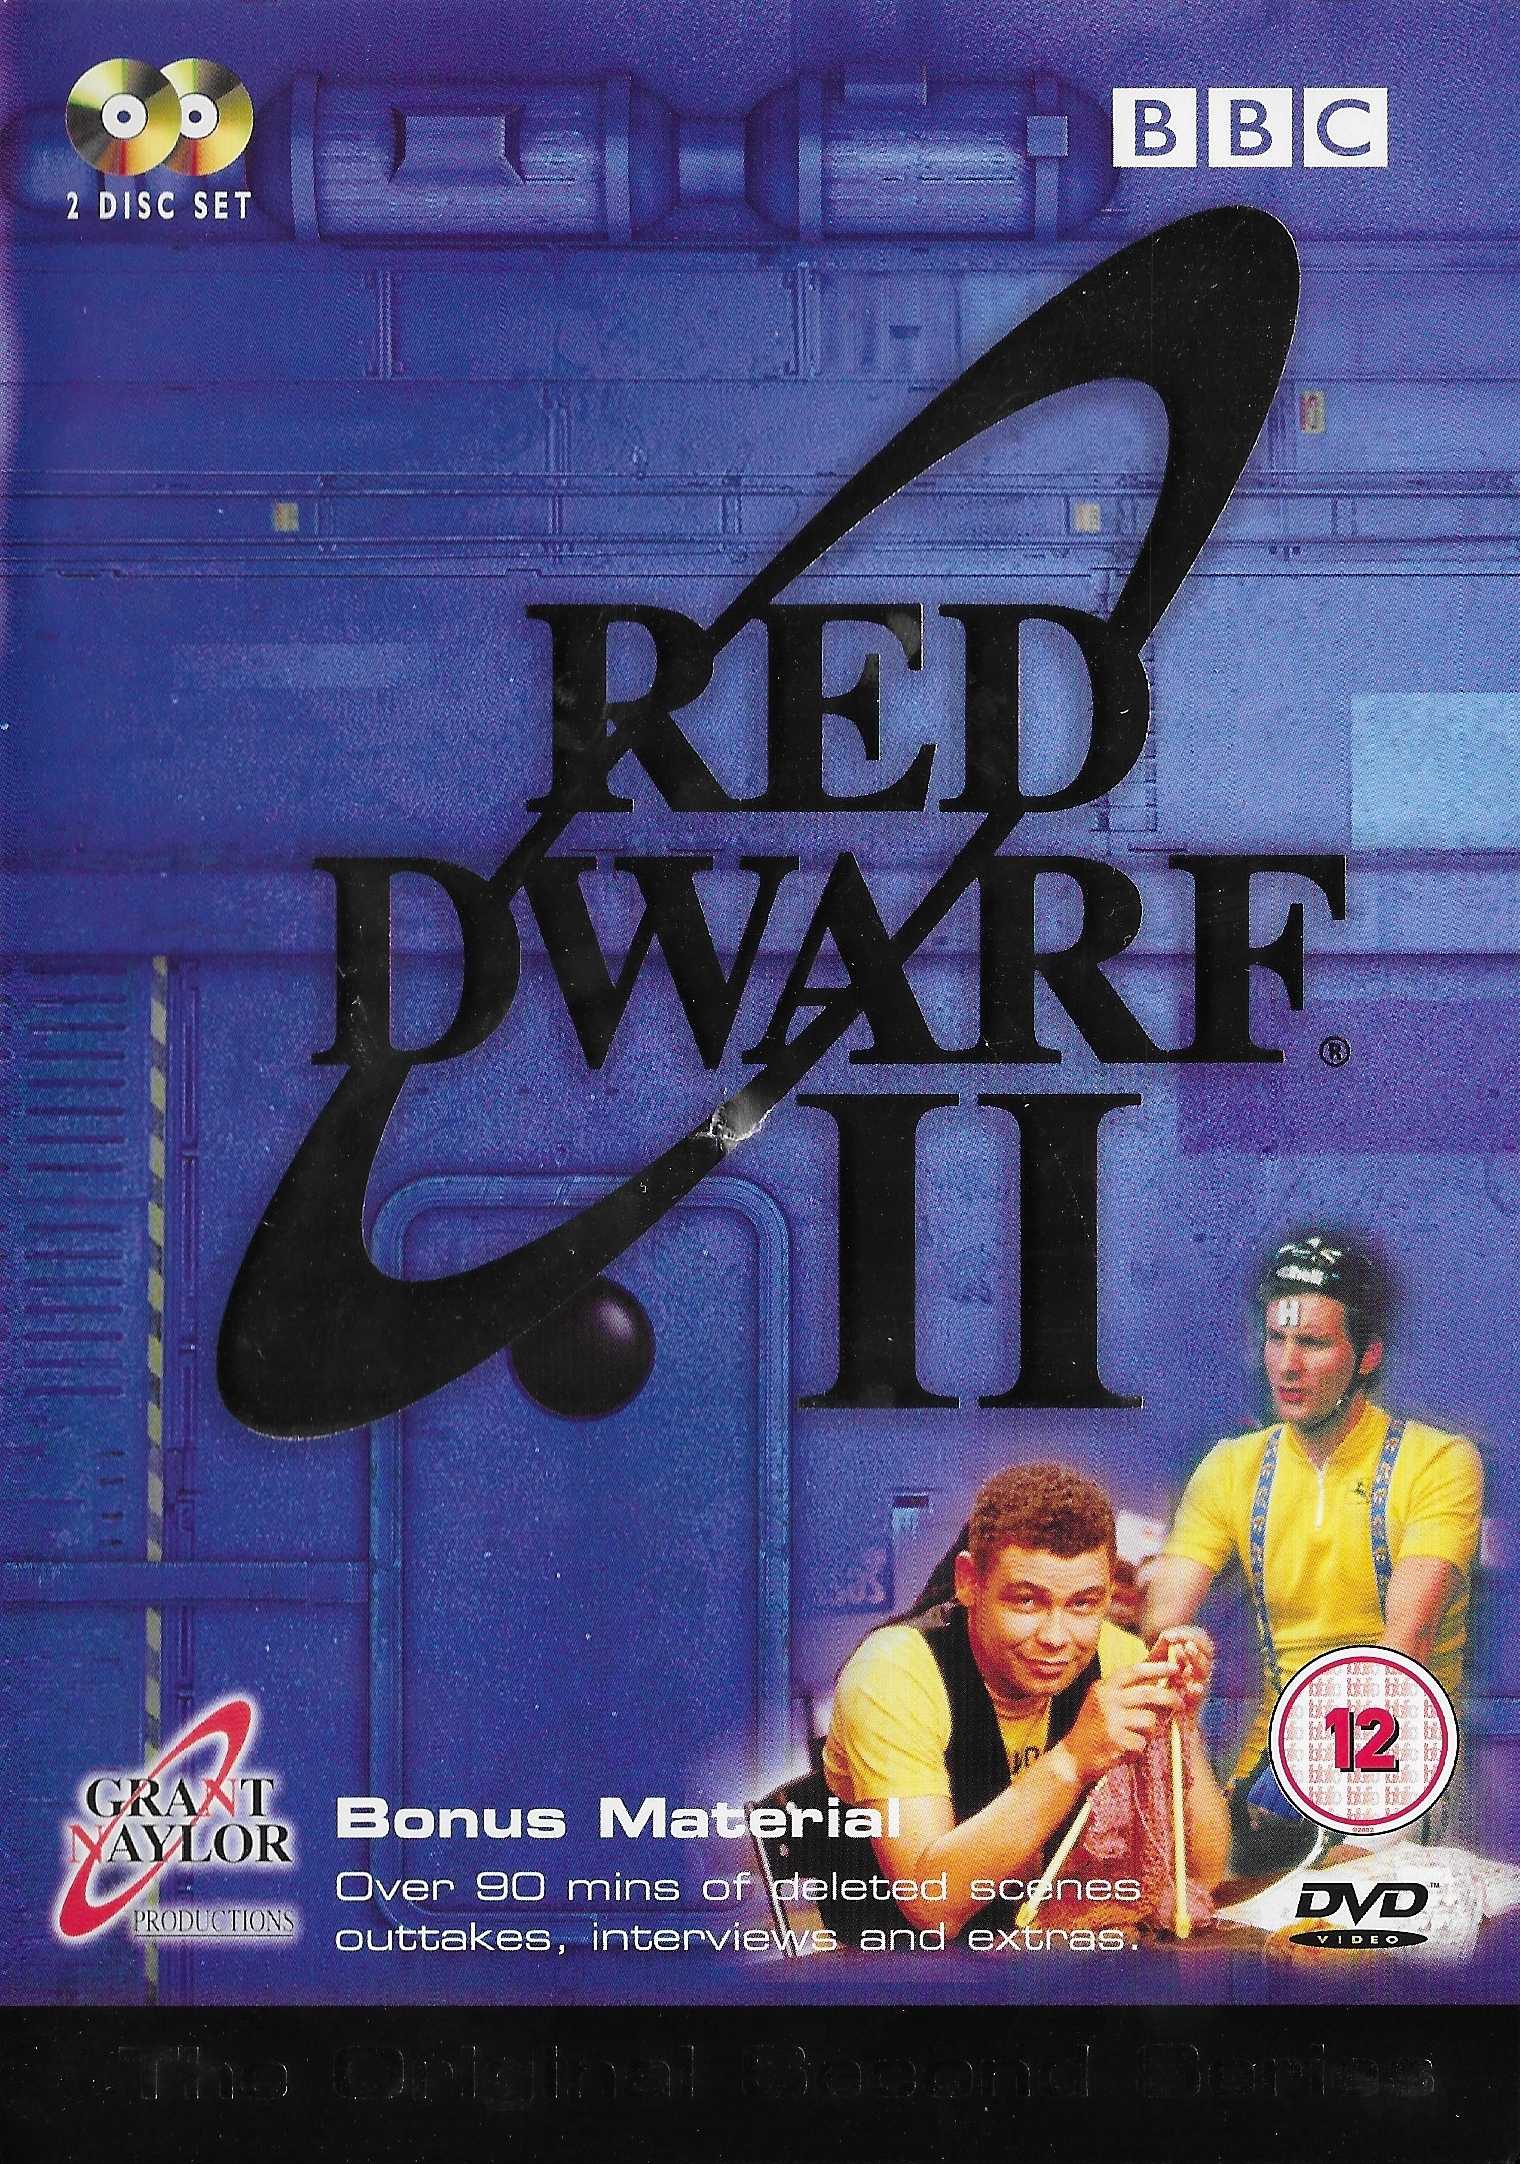 Picture of BBCDVD 1118 Red dwarf - Series II by artist Rob Grant / Doug Naylor from the BBC dvds - Records and Tapes library